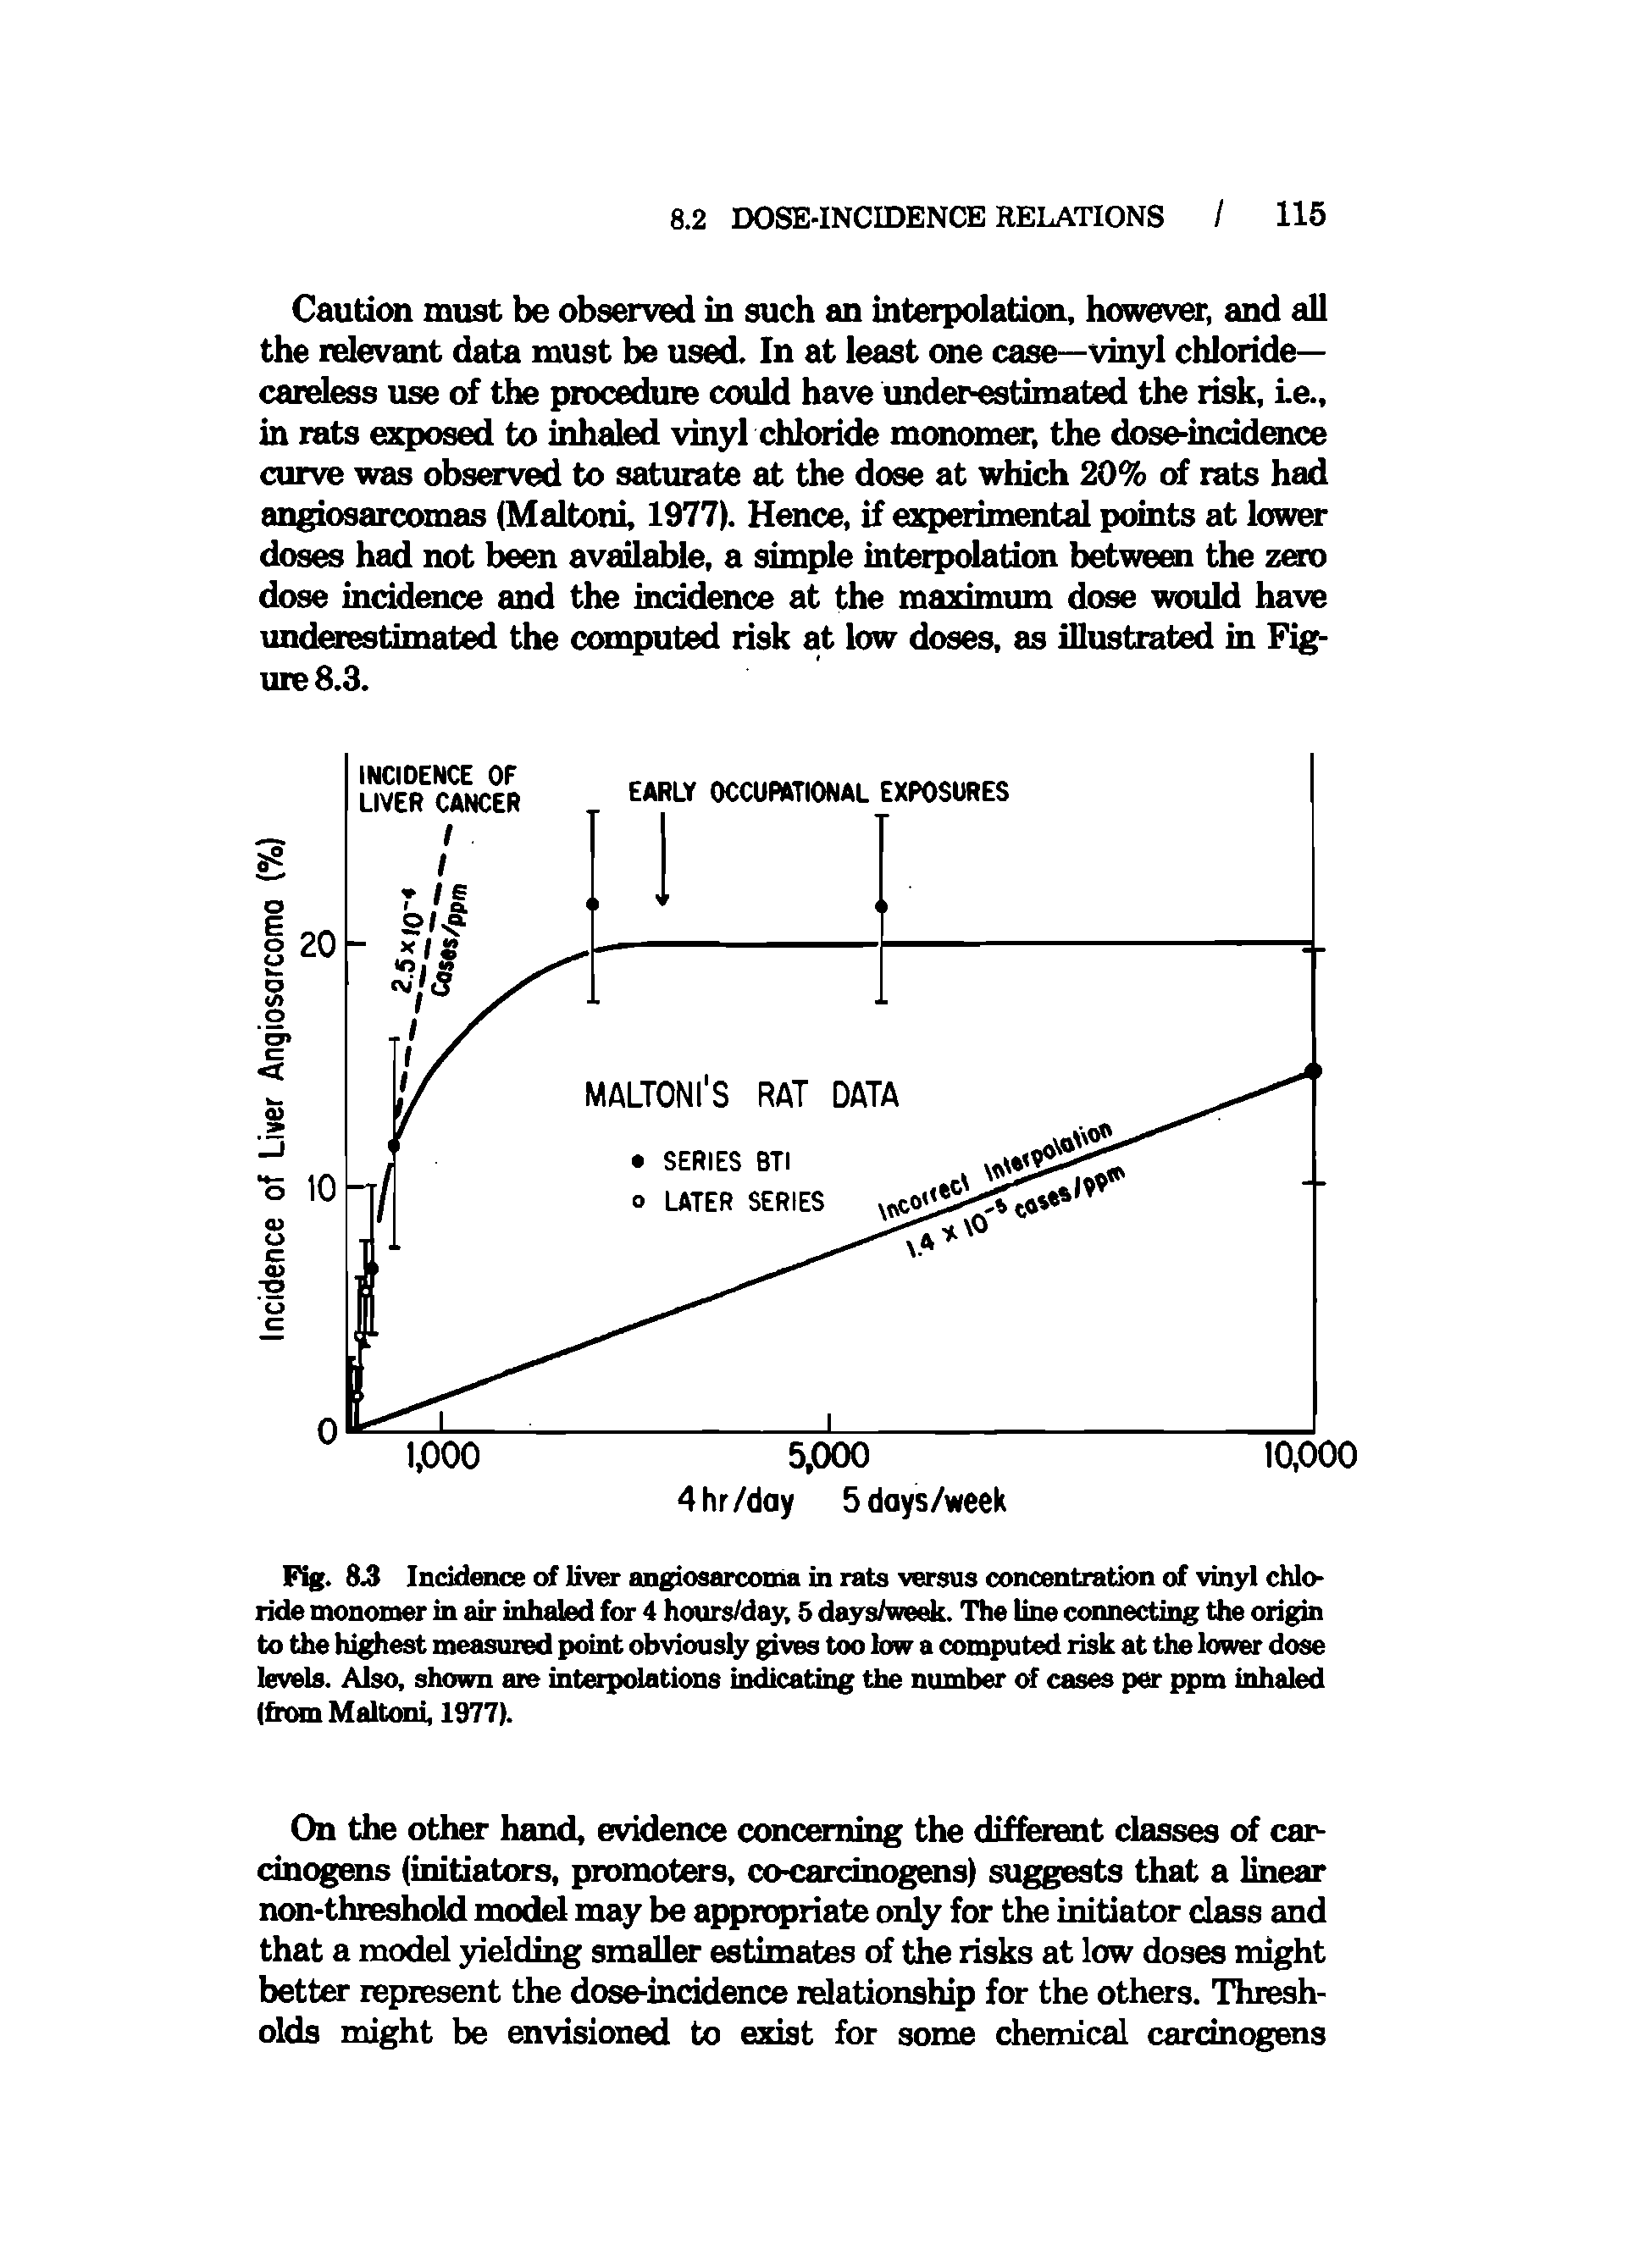 Fig. 8.3 Incidence of liver angiosorcouia in rats versus concentration of vinyl chloride monomer in air inhaled for 4 hours/day, 5 days/week. The line connecting the origin to the highest measured point obviously gives too low a computed risk at the lower dose levels. Also, shown are int polations indicating the number of cases per ppm inhaled (fixun Maltoni, 1977).